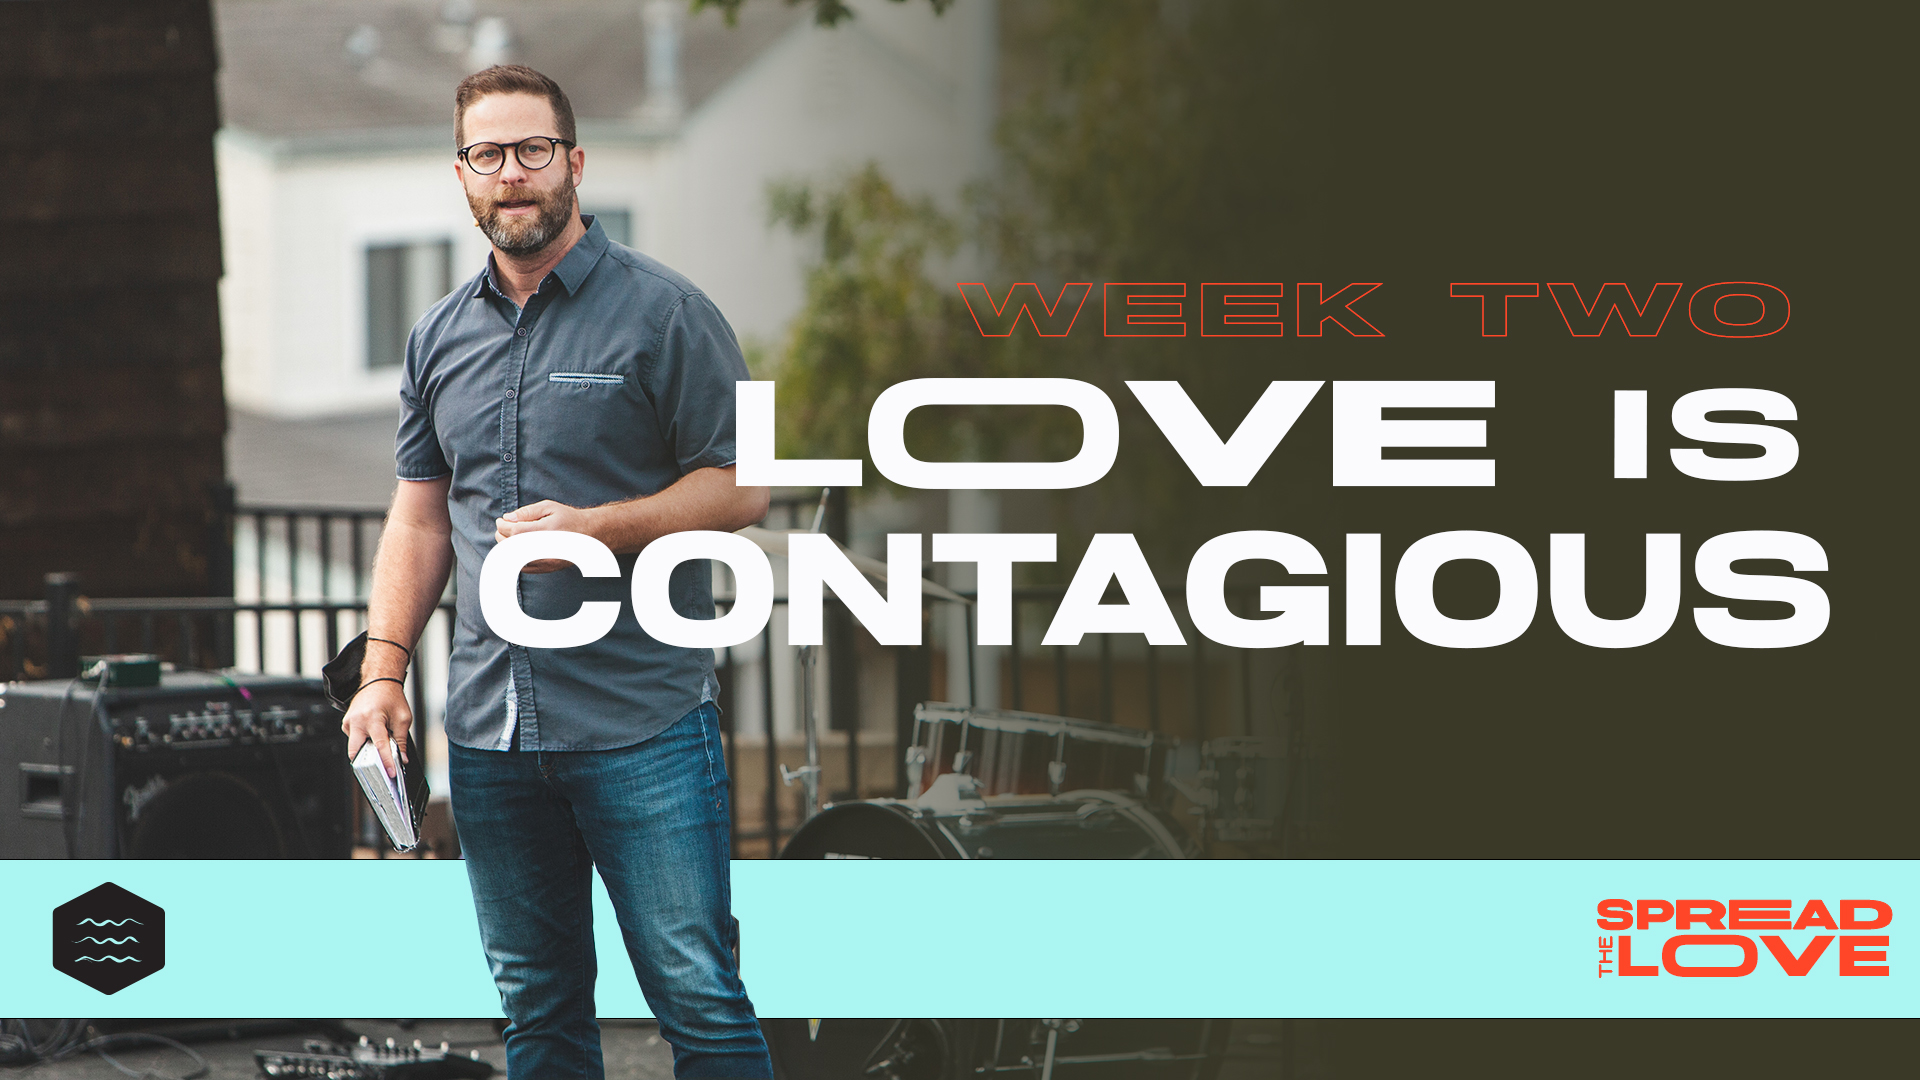 Love is Contagious Image